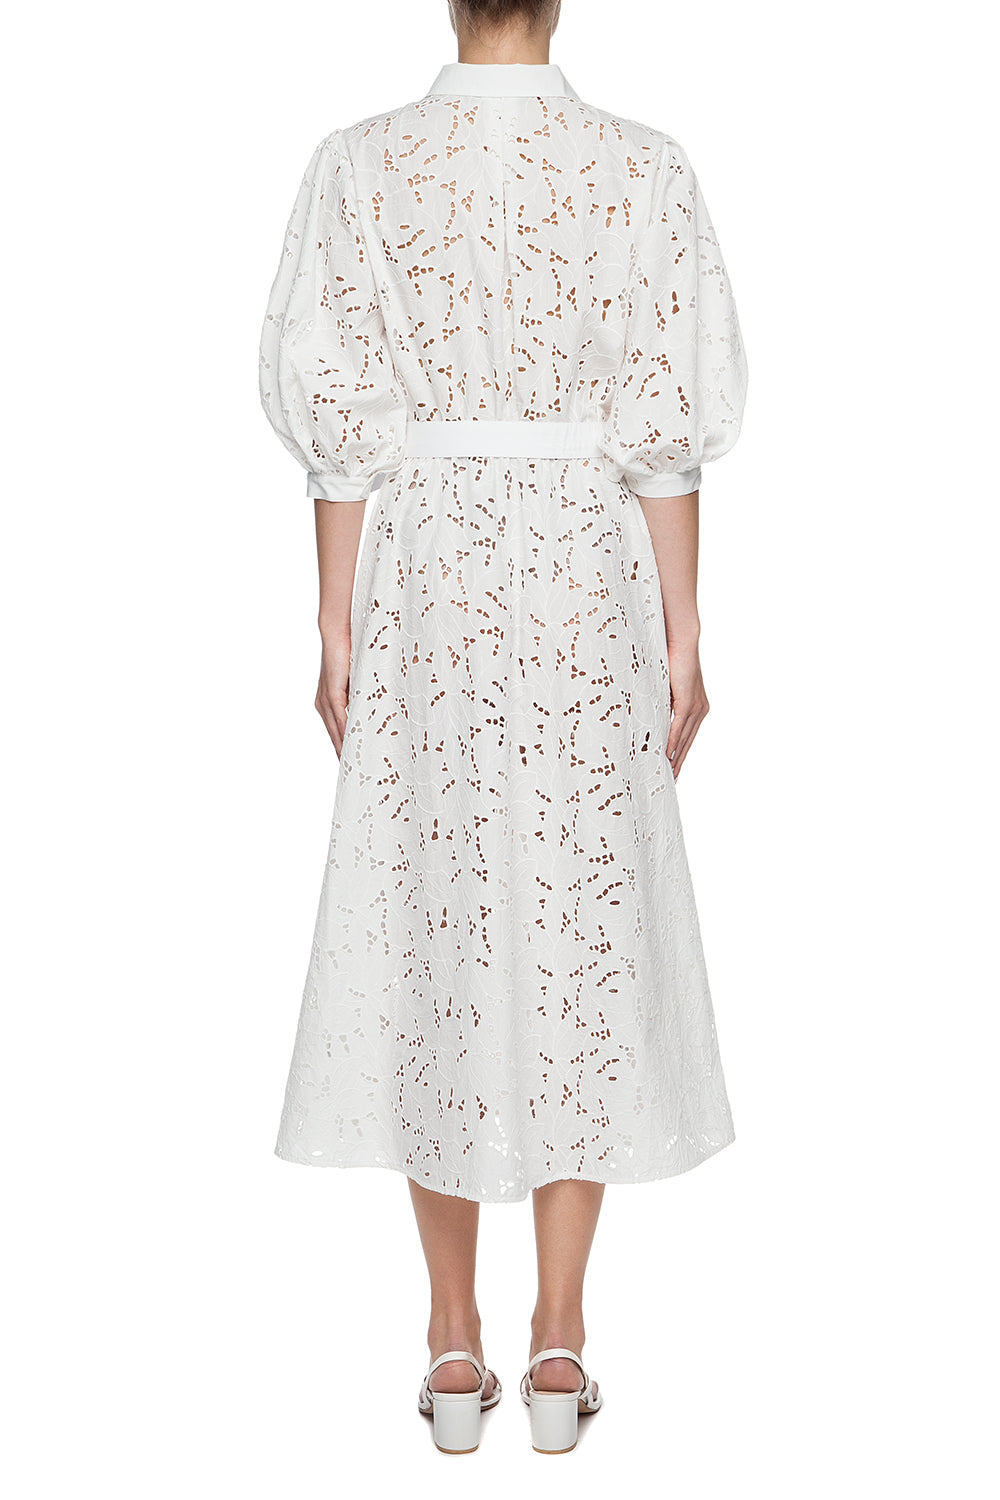 White embroidered shirt-dress